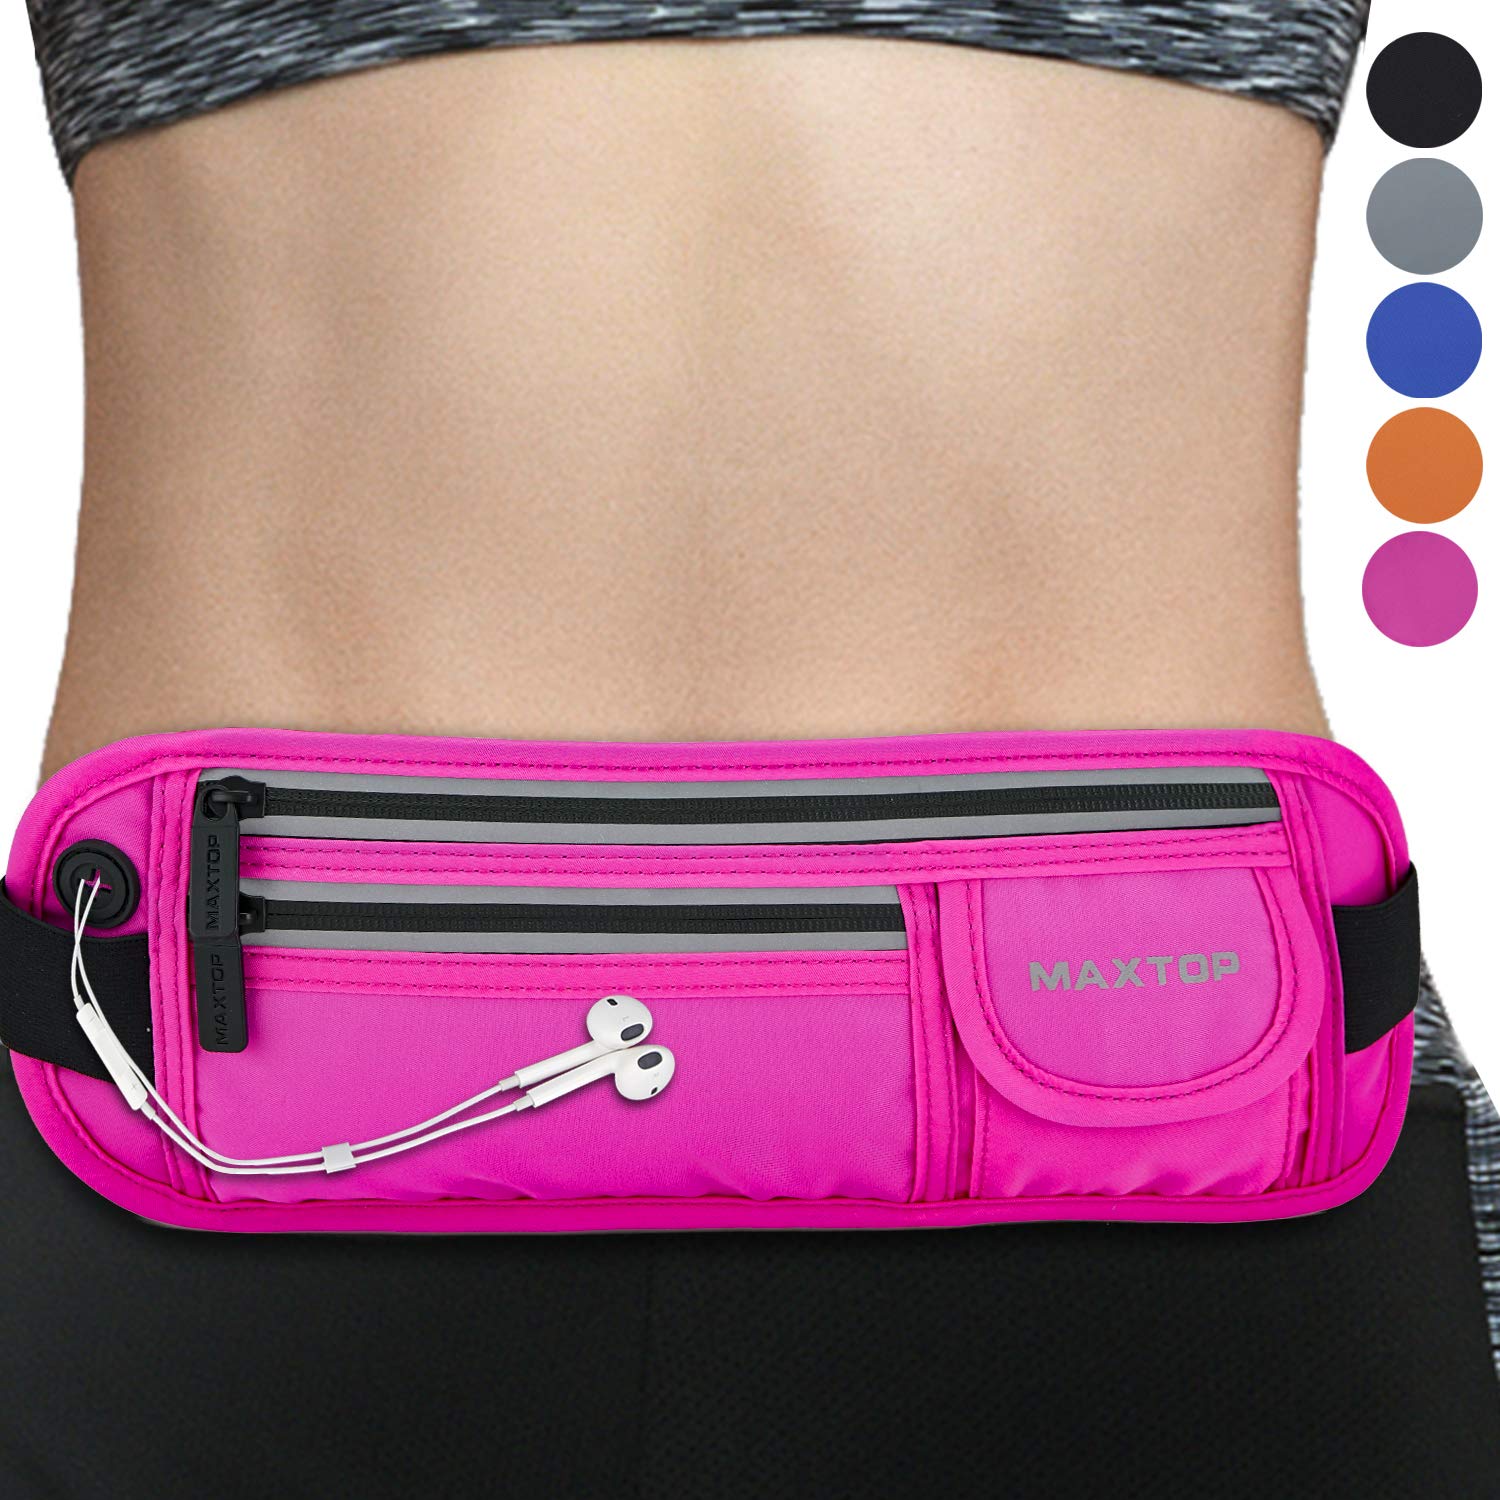 MAXTOP No-Bounce Reflective Running Belt Pouch Black Waist Pack Bag,Water  Resistant Workout Fanny Pack for Fitness Jogging Hiking Travel,Cell Phone  Holder Fits All Phones, Waist Packs -  Canada